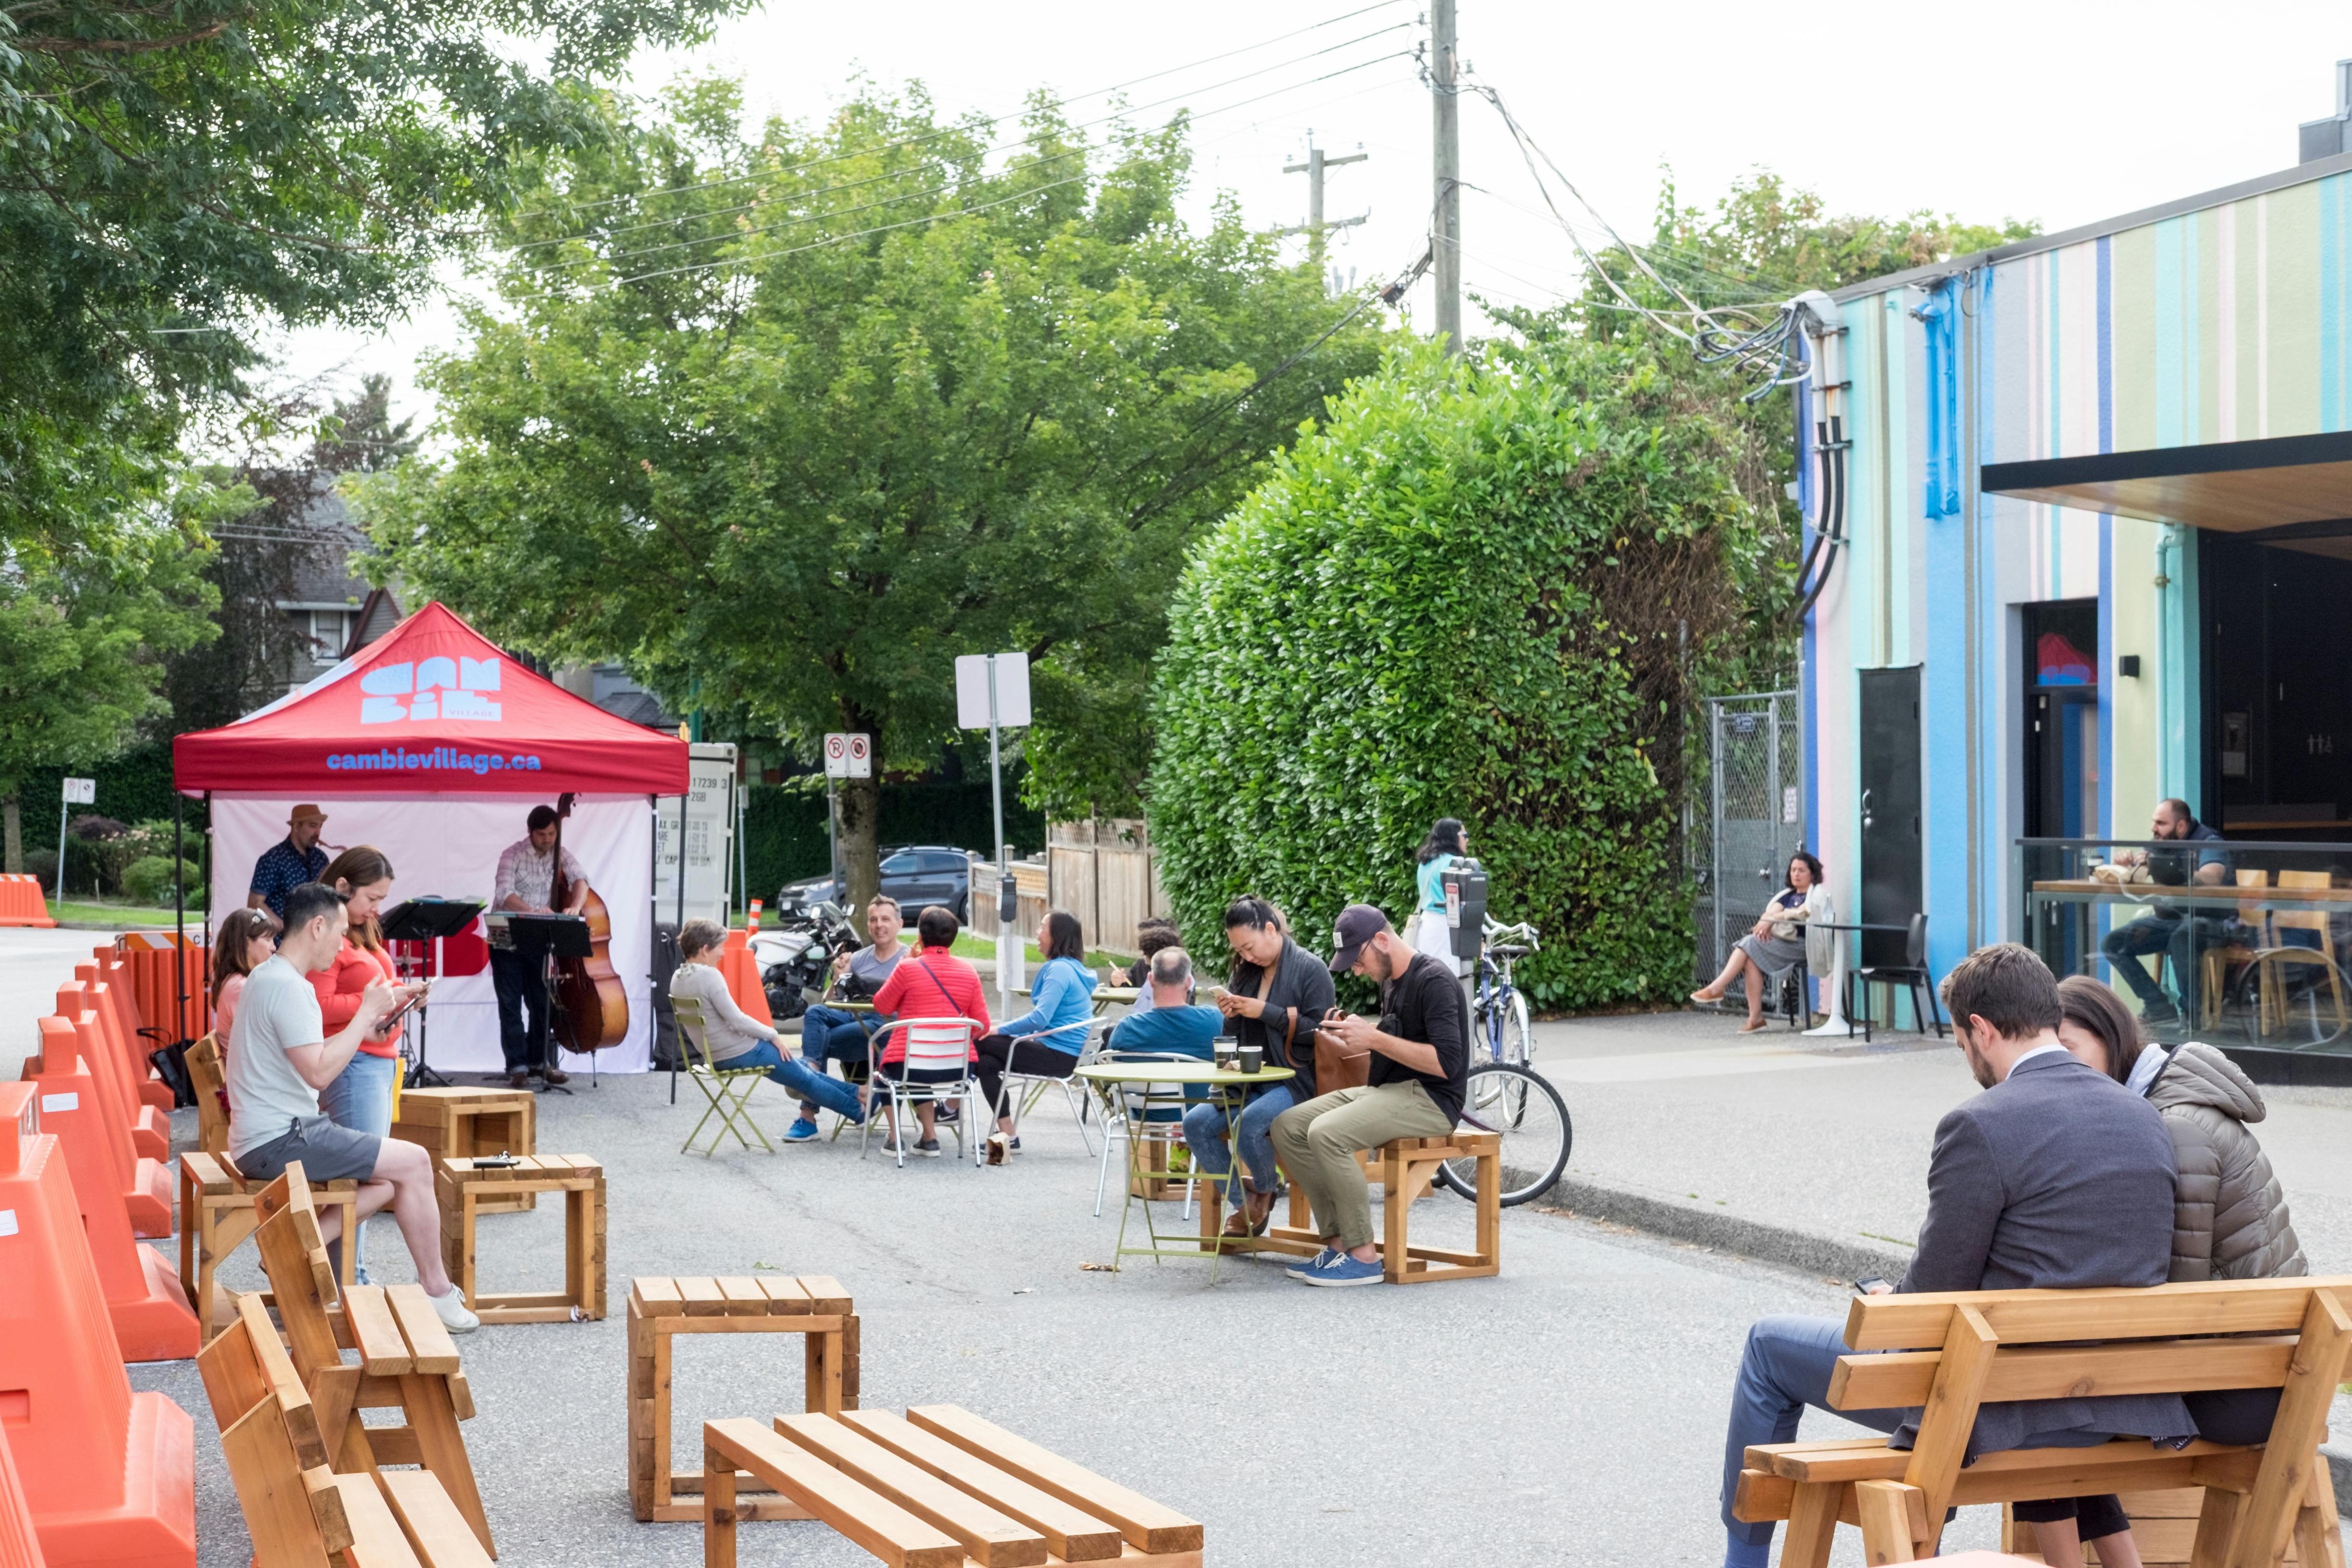 18th & Cambie Pop-up Plaza